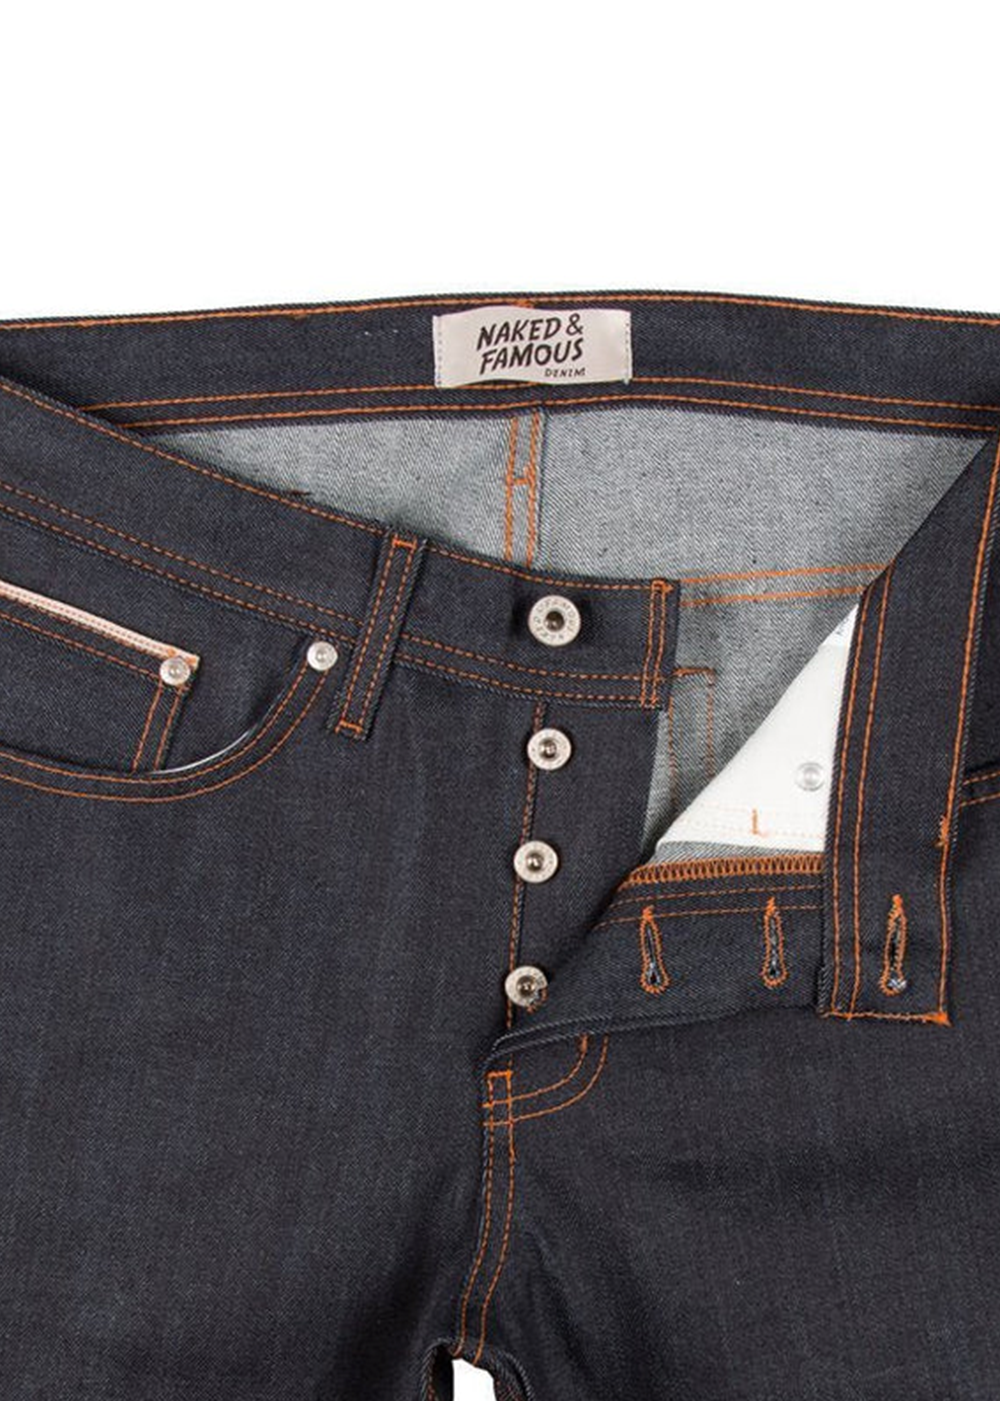 Super Guy - 11oz Stretch Selvedge - Naked and Famous Denim Canada - Danali - 015500